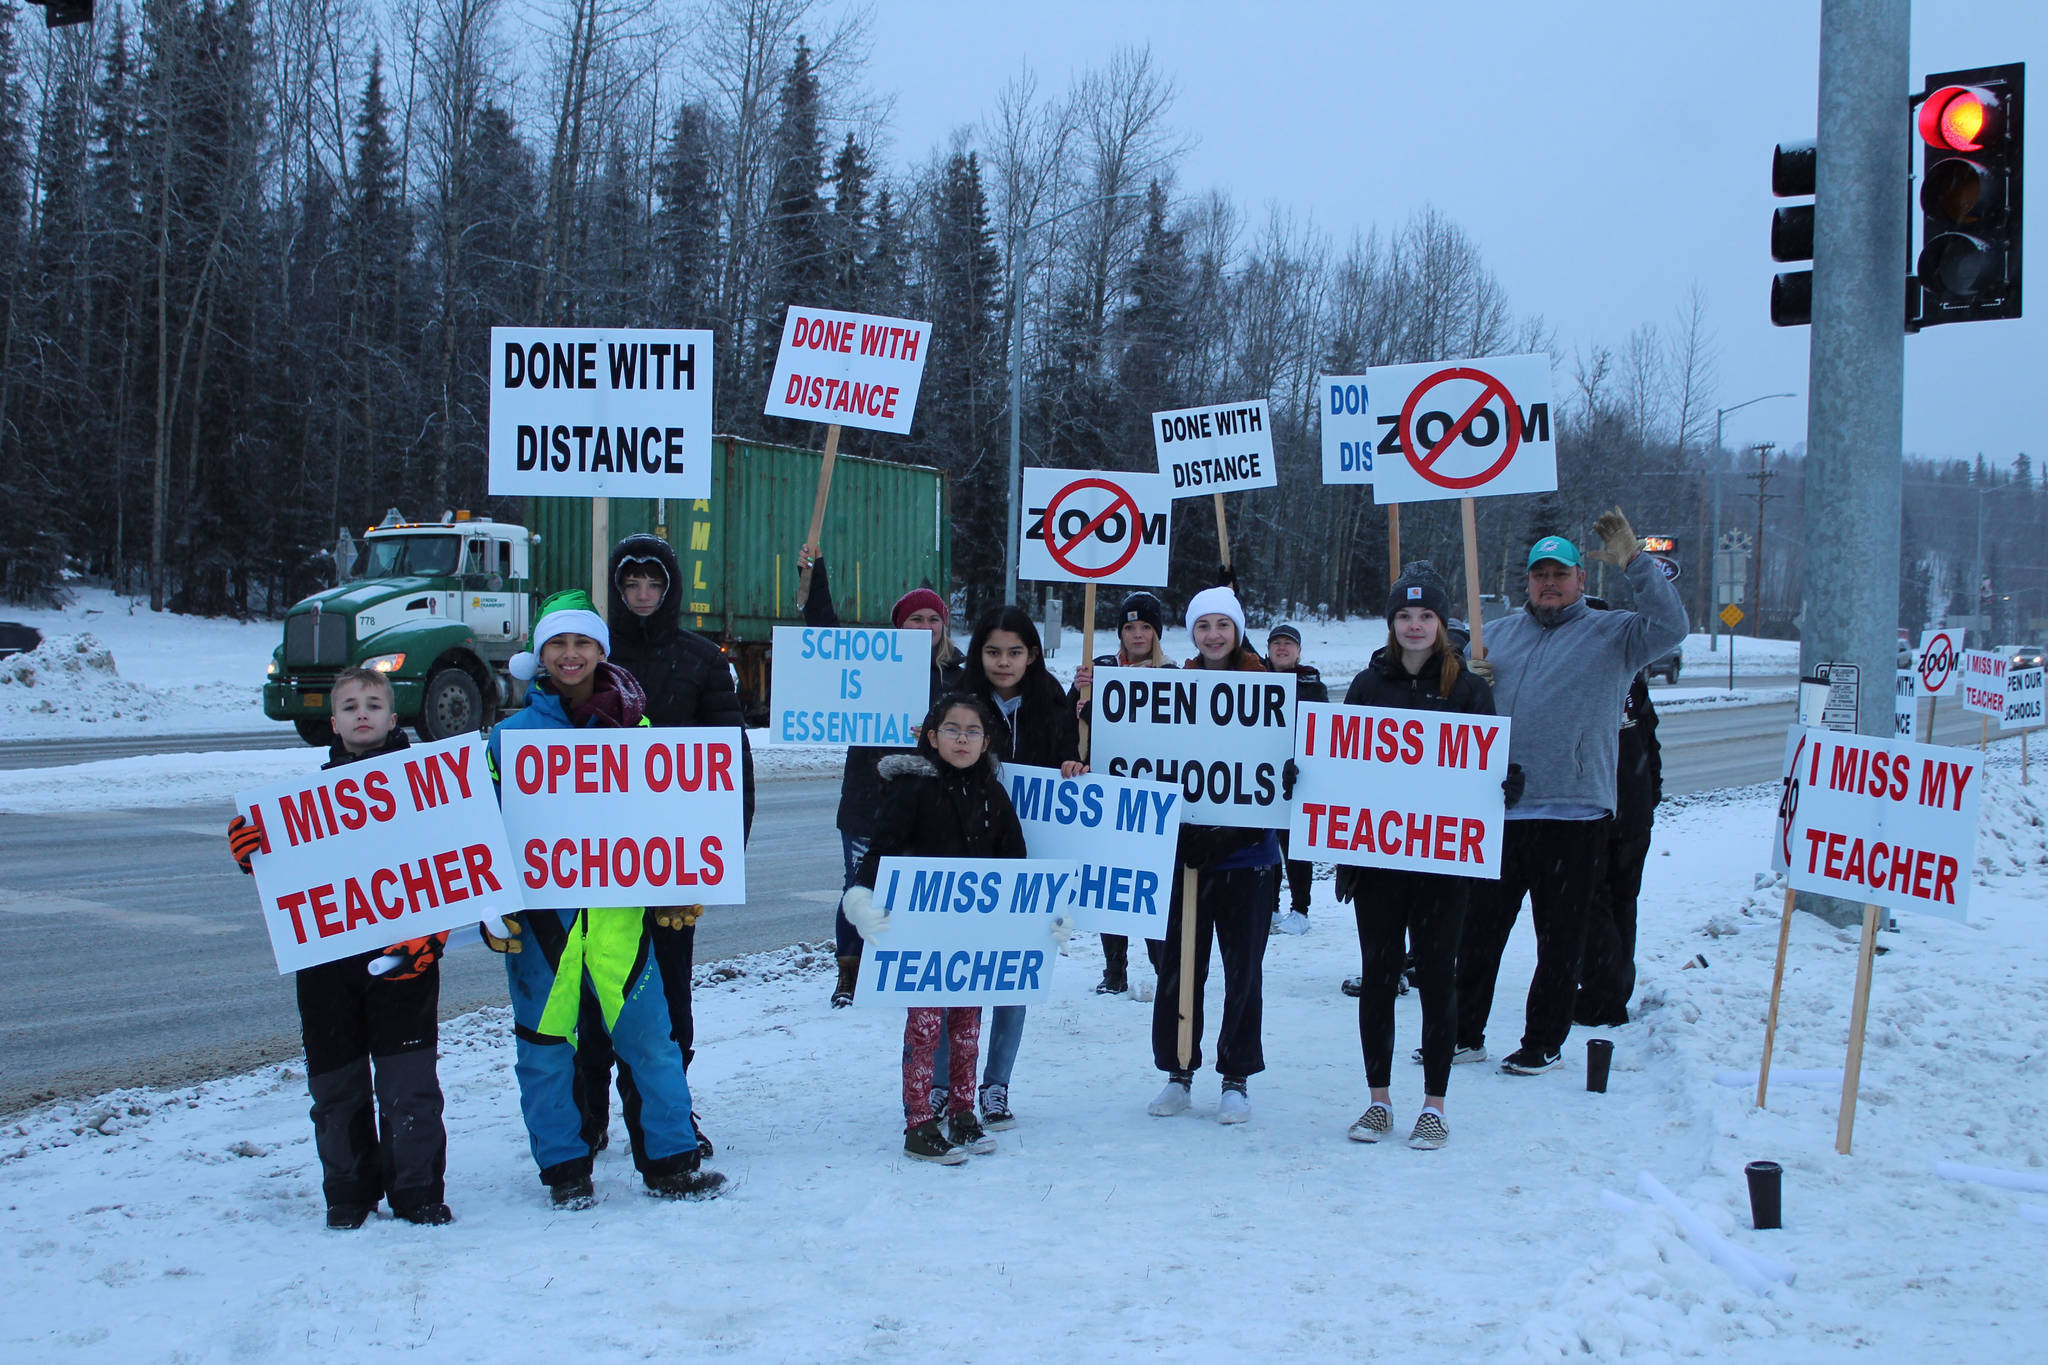 Protestors are seen at the intersection of Kenai Spur Hwy. and Sterling Hwy. on Tuesday, Dec. 15, 2020 in Soldotna, Alaska. (Photo by Ashlyn O’Hara/Peninsula Clarion)